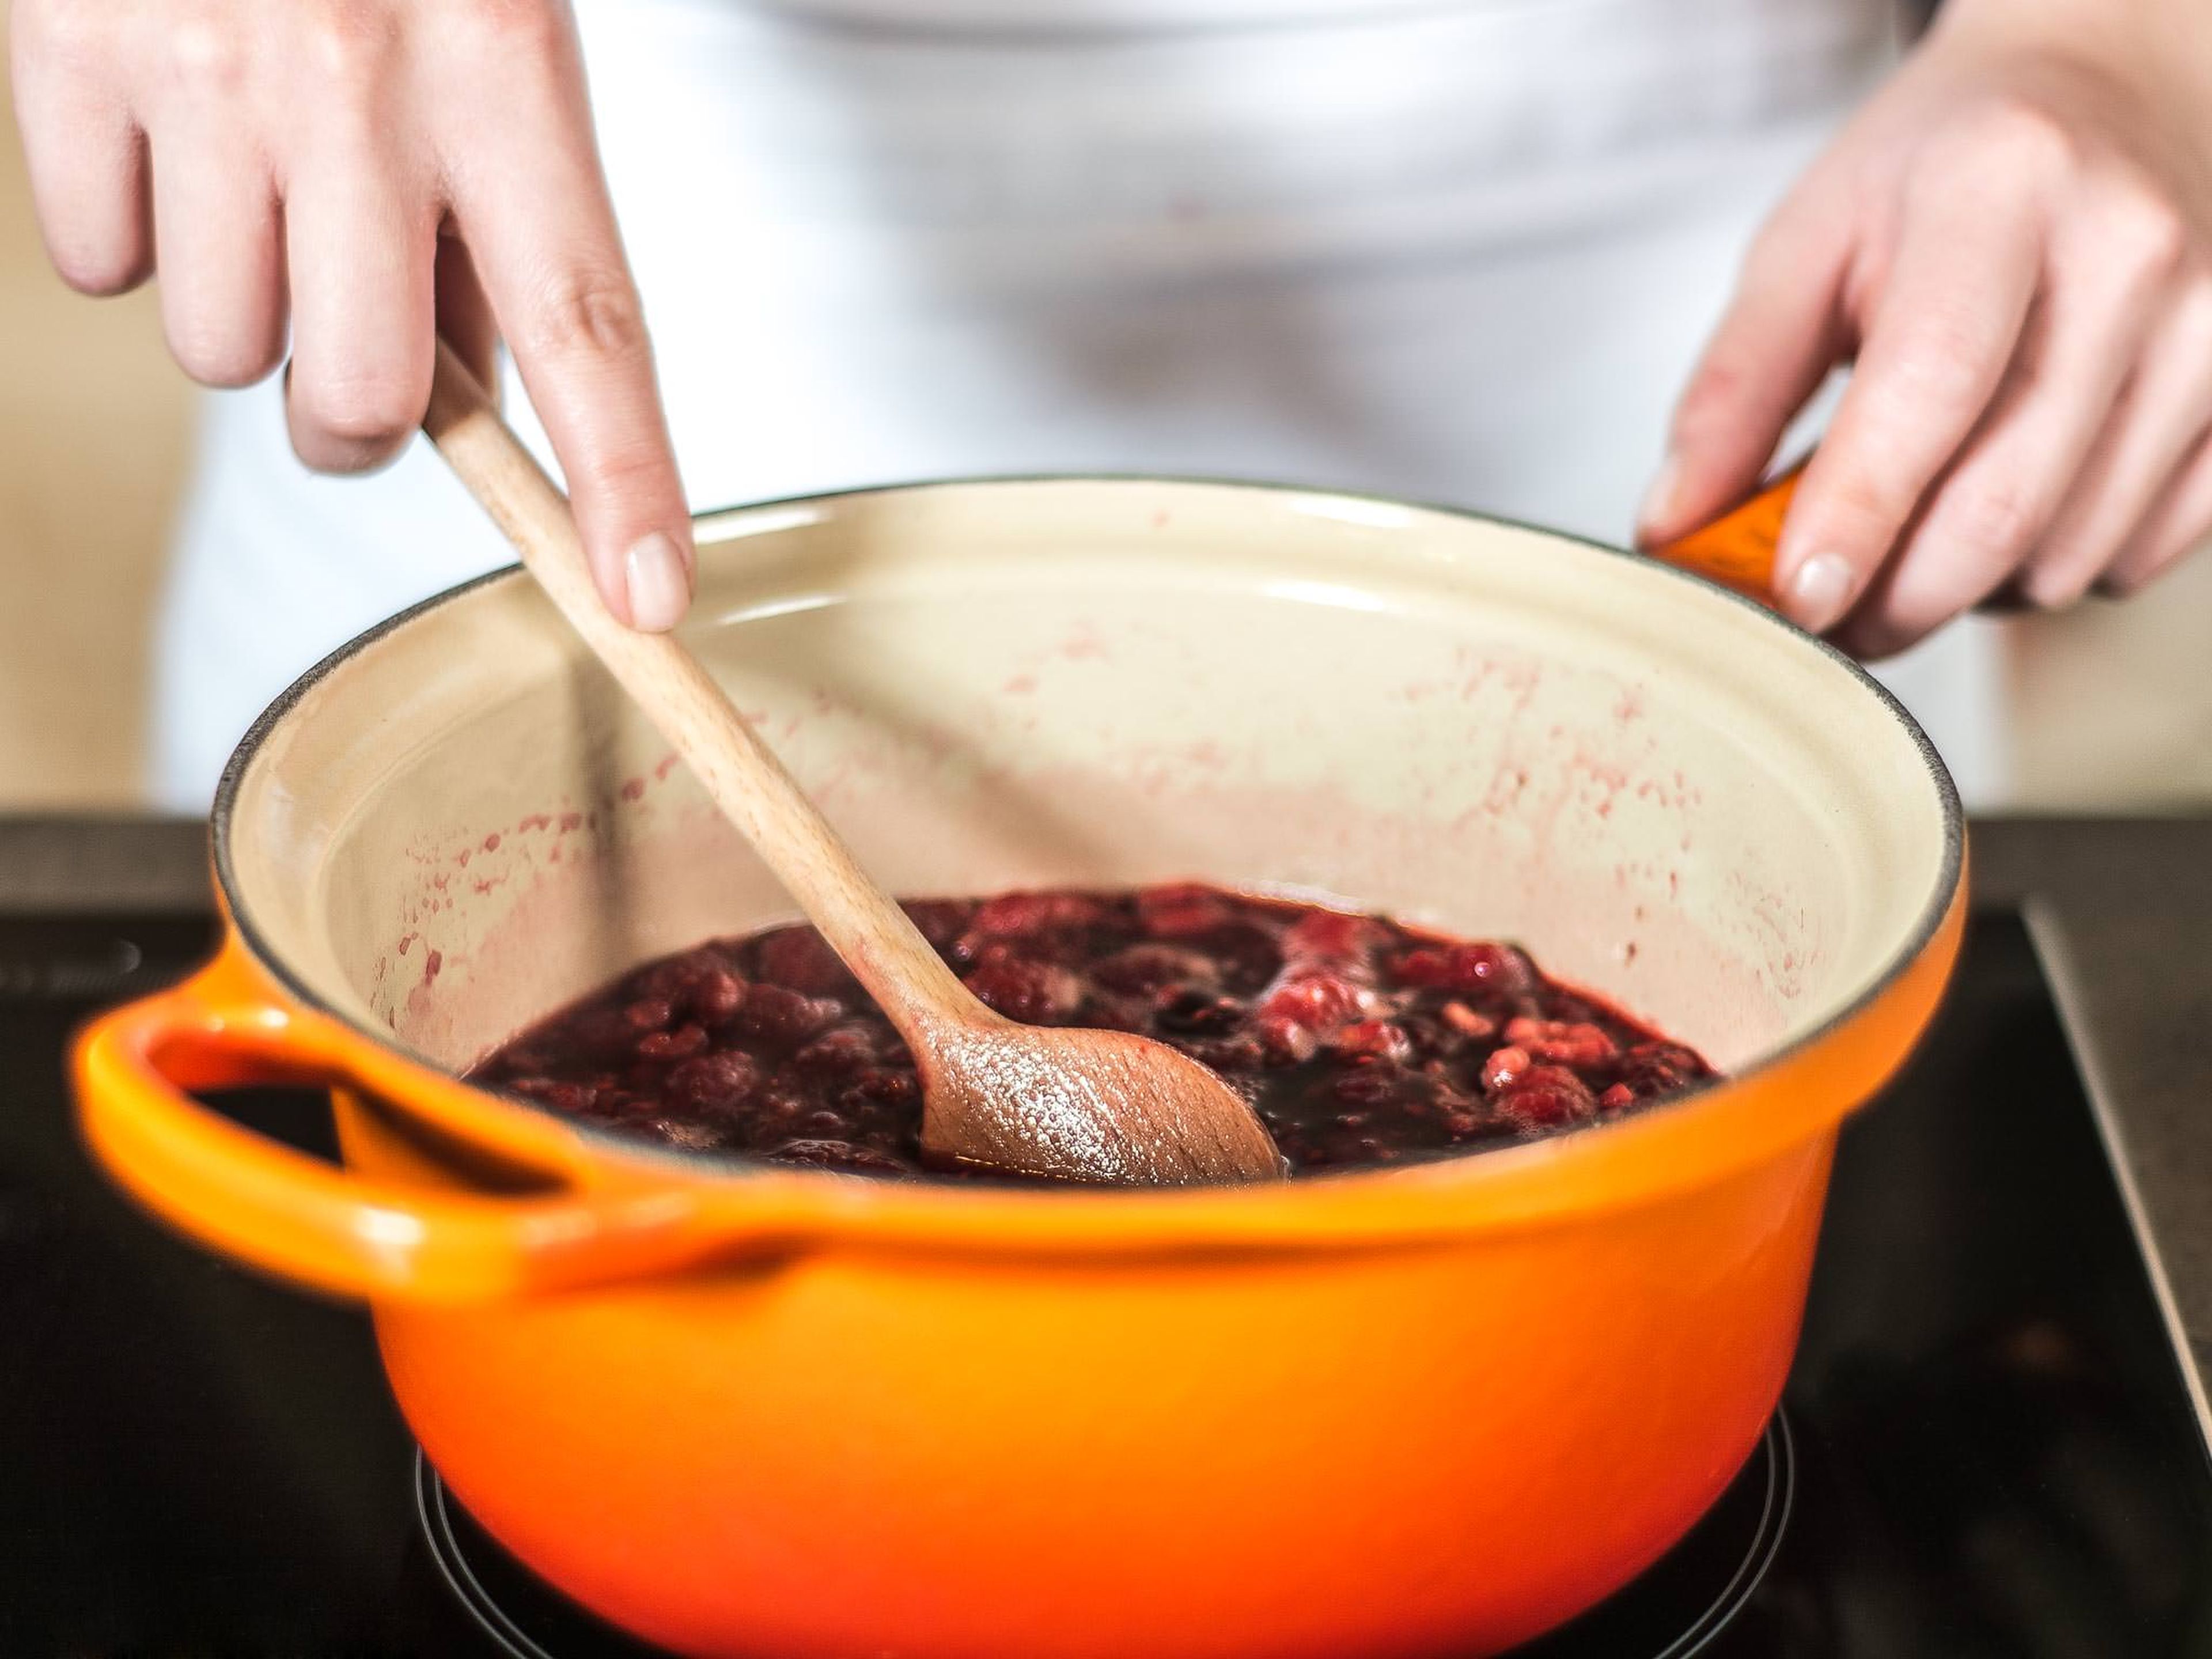 Boil water with sugar, add raspberries and let simmer for approx. 10 – 12 min. on low heat.